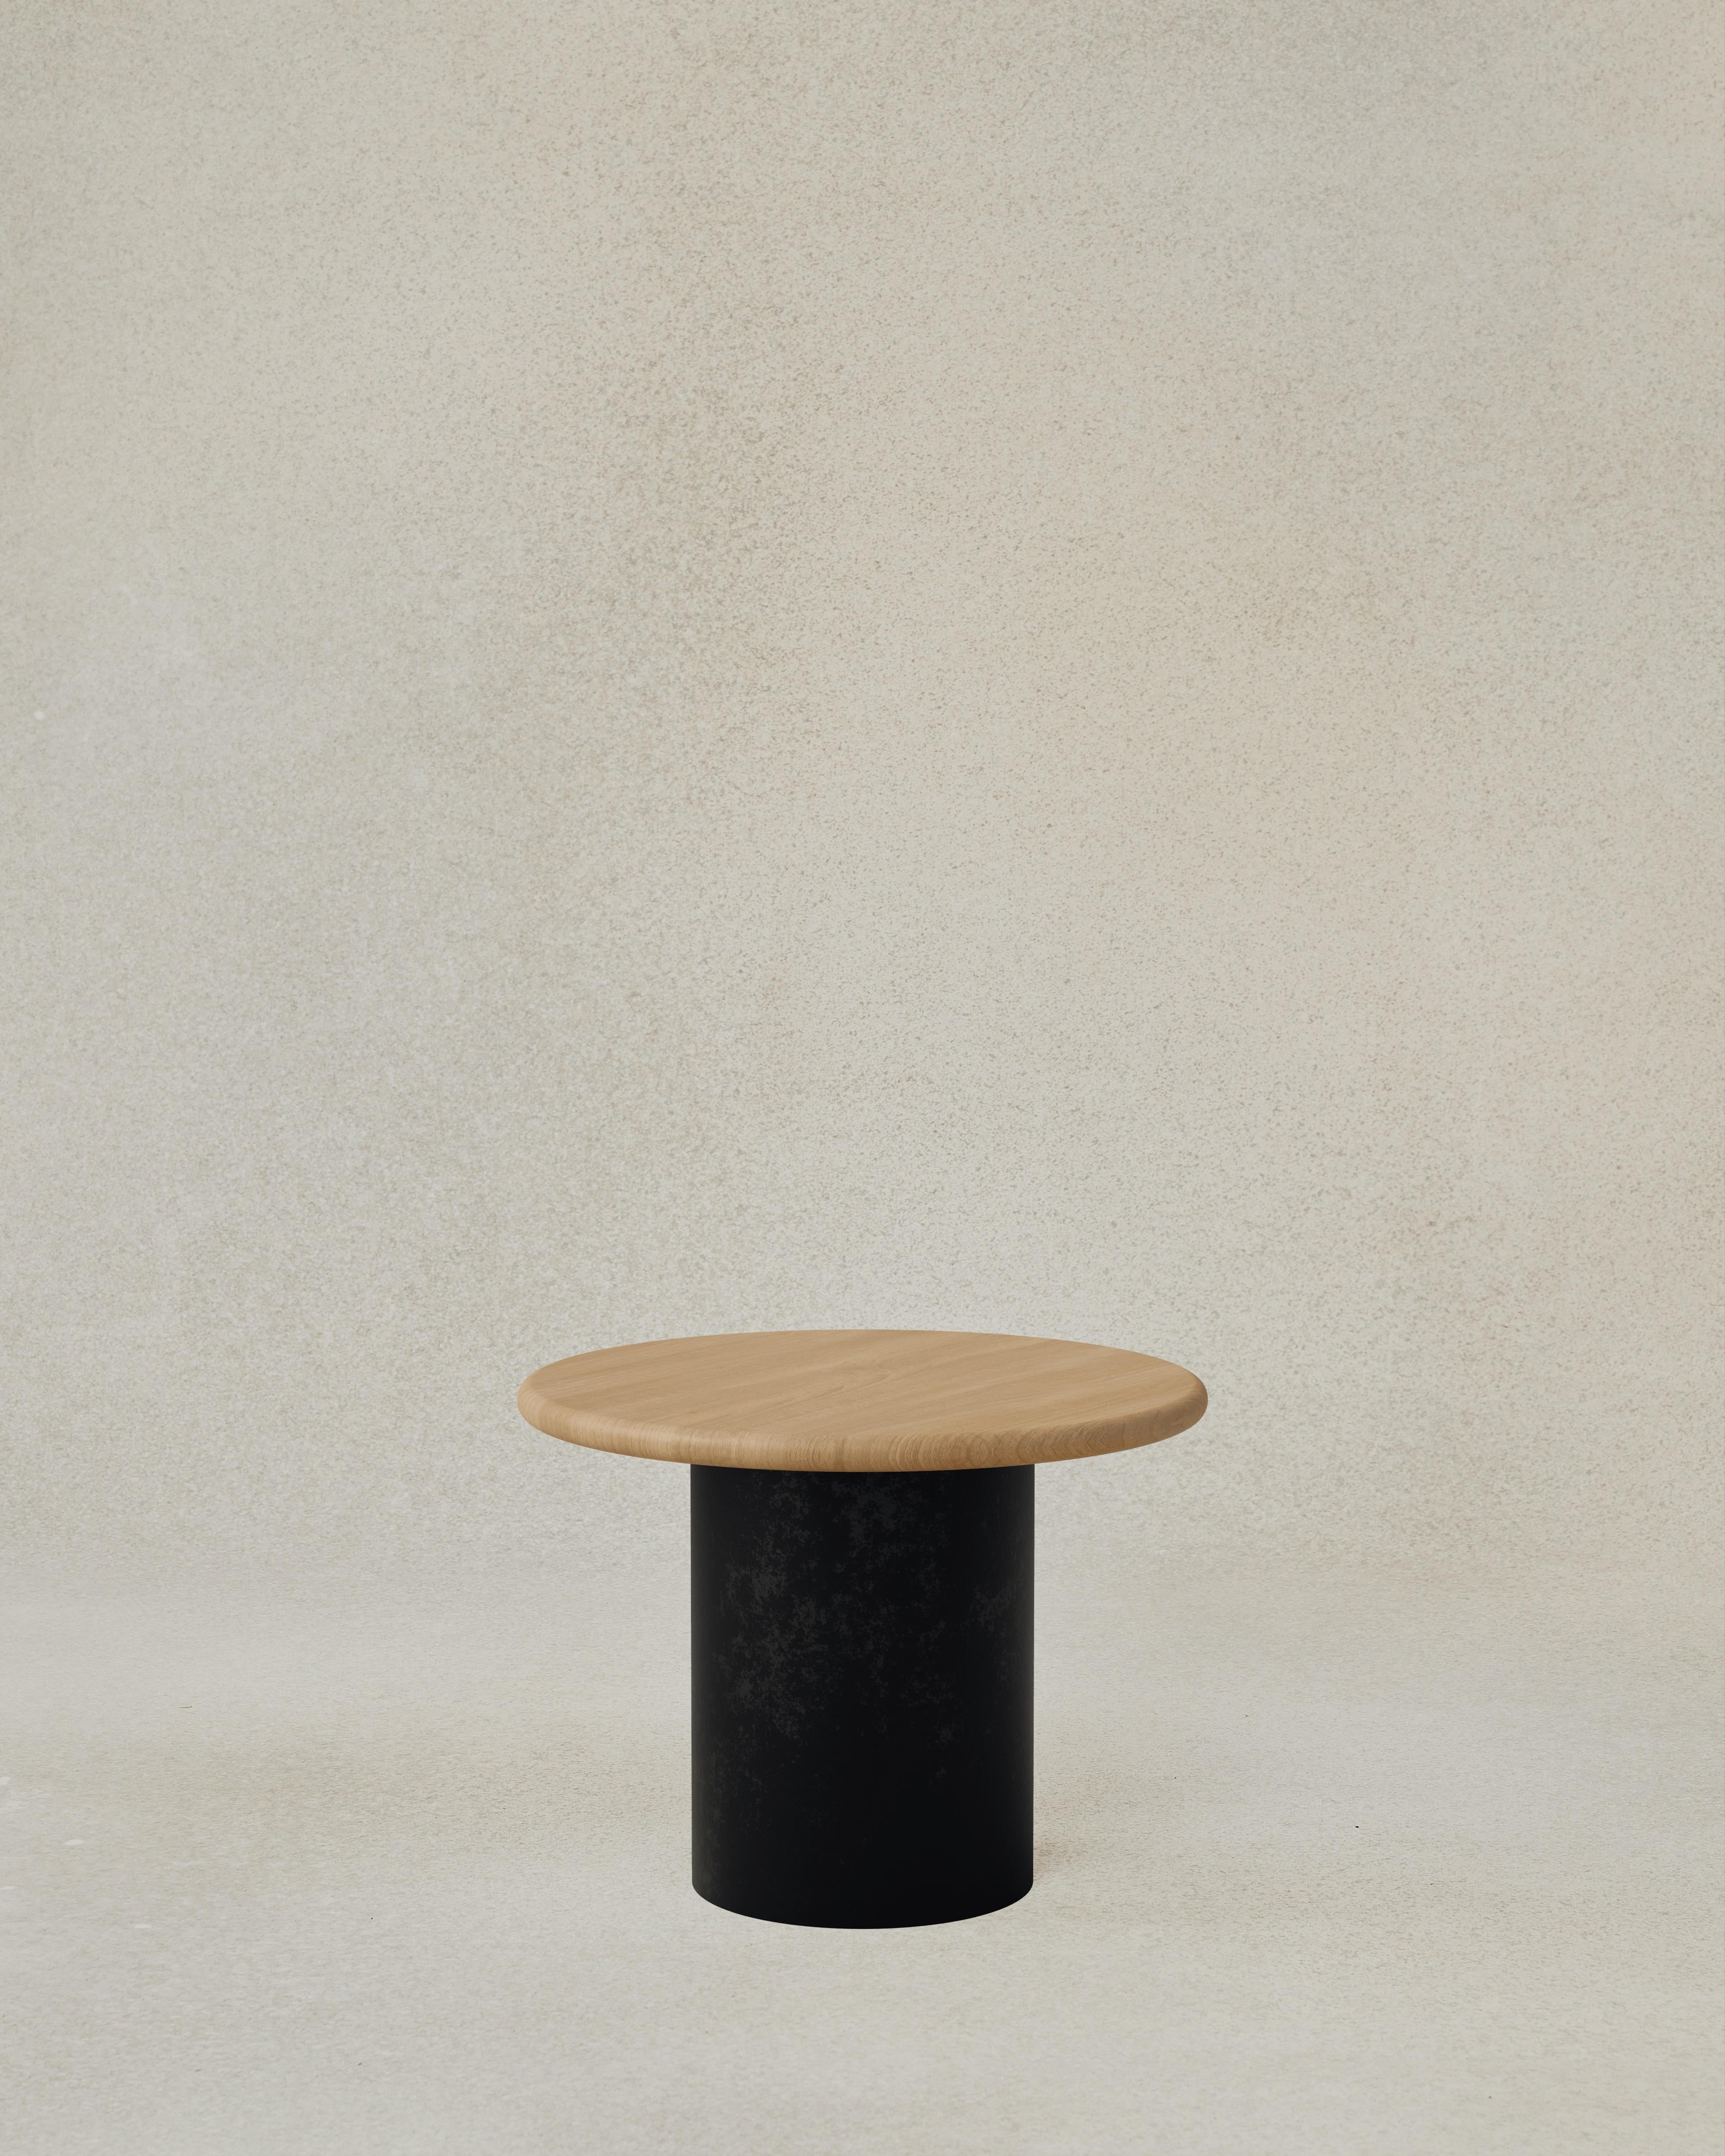 The Raindrop 500 is the largest Side Table we offer in the series can be paired with a 300 or 1000, or both! Now available in a range of finishes to suit any interior or style. The raindrops nestle together to form a cascading series of tables in